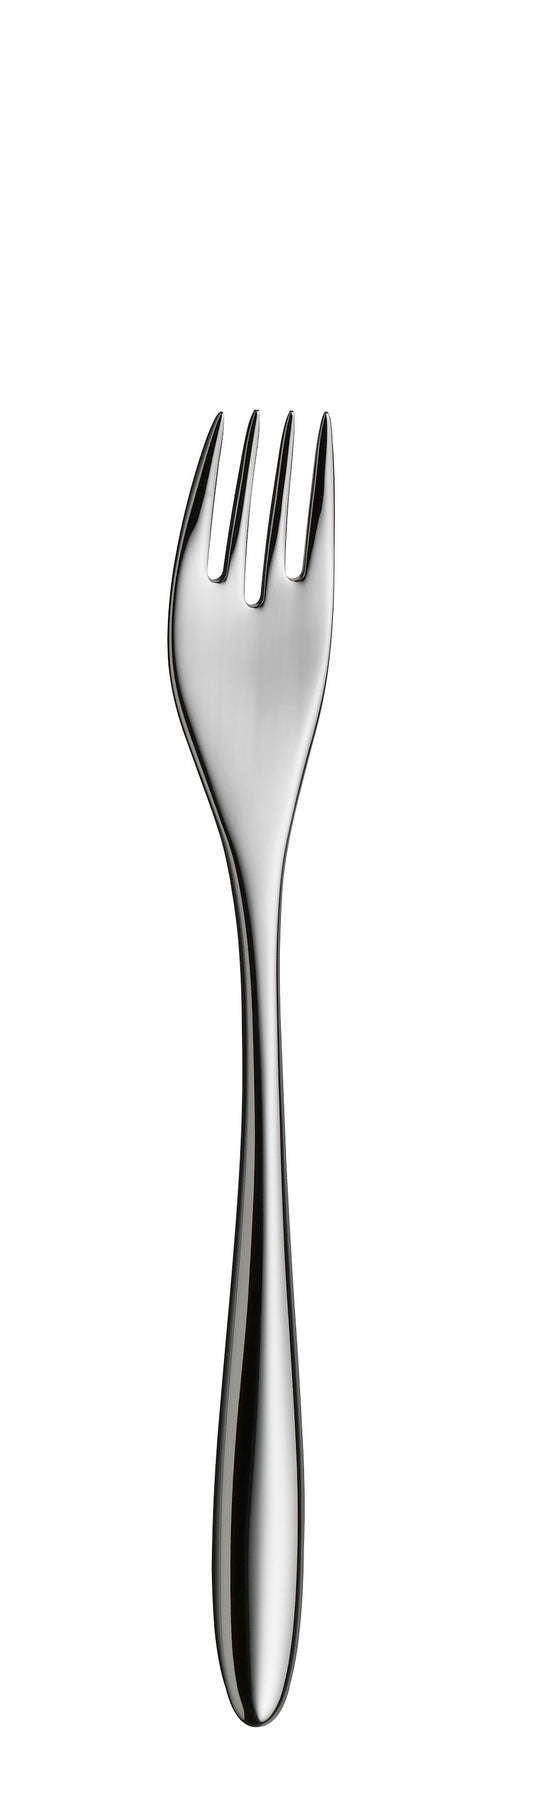 Fish fork AVES silverplated 190mm